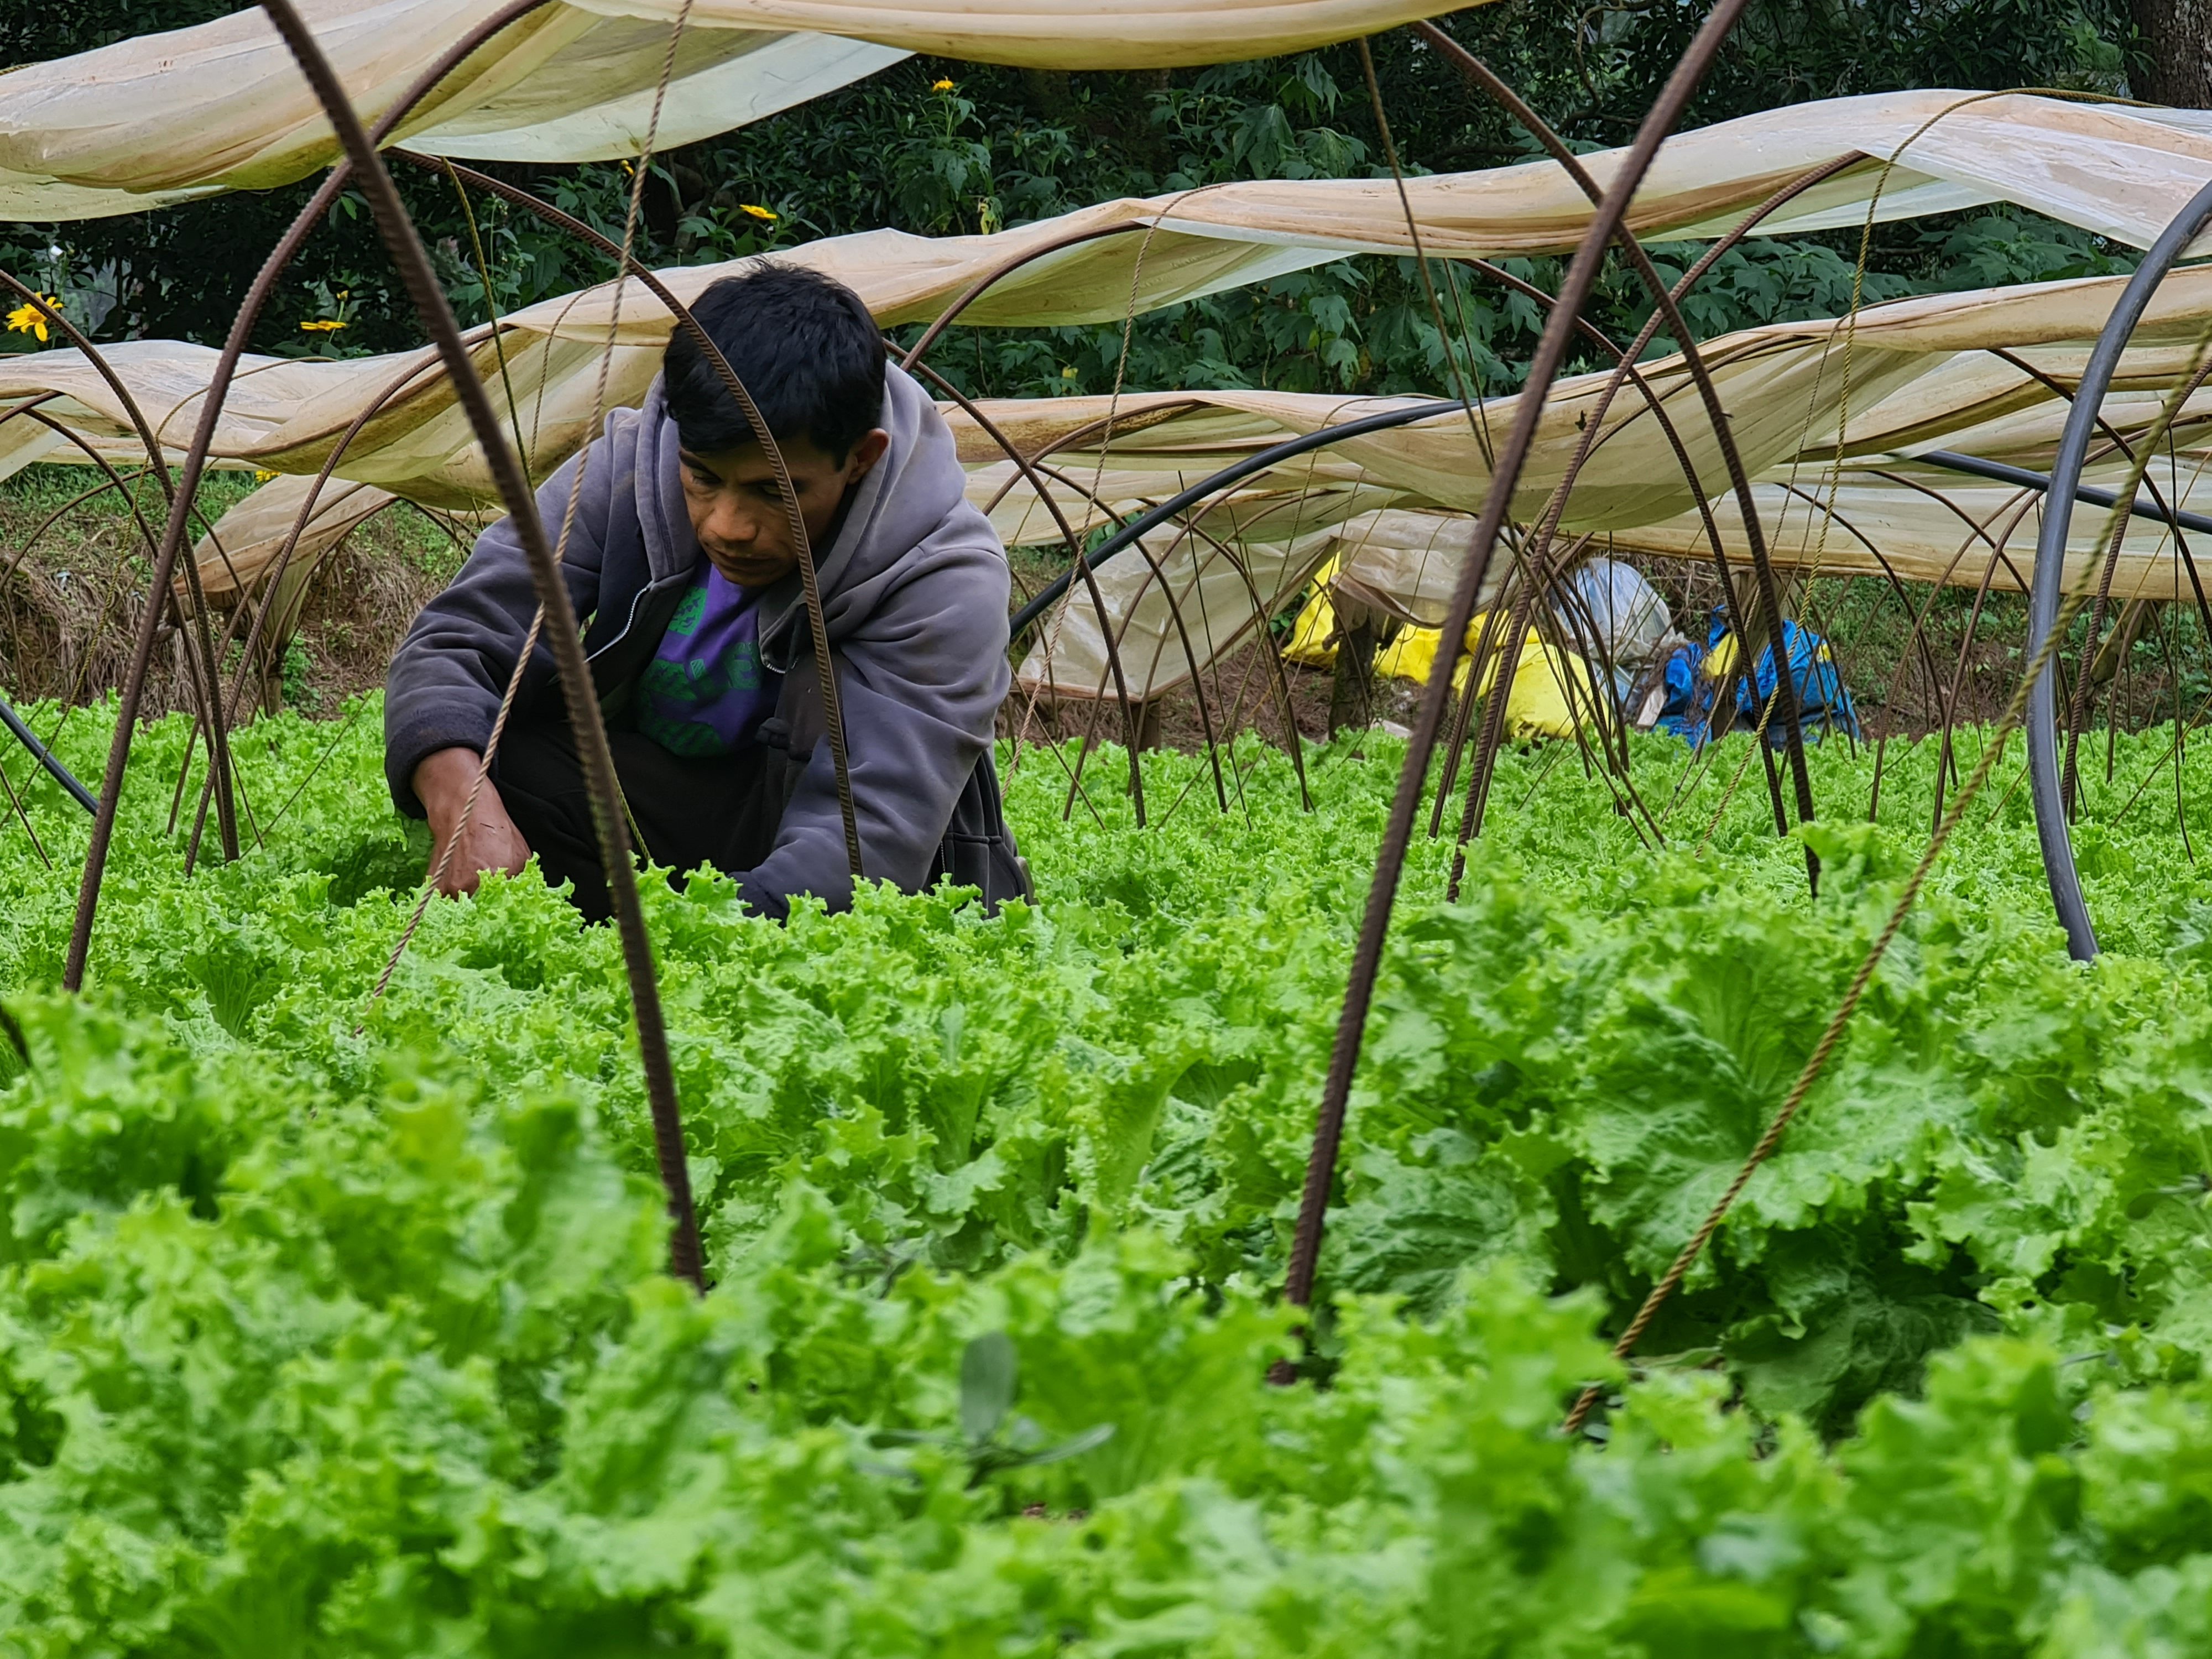 Agriculture thrives in Baguio’s urban landscape